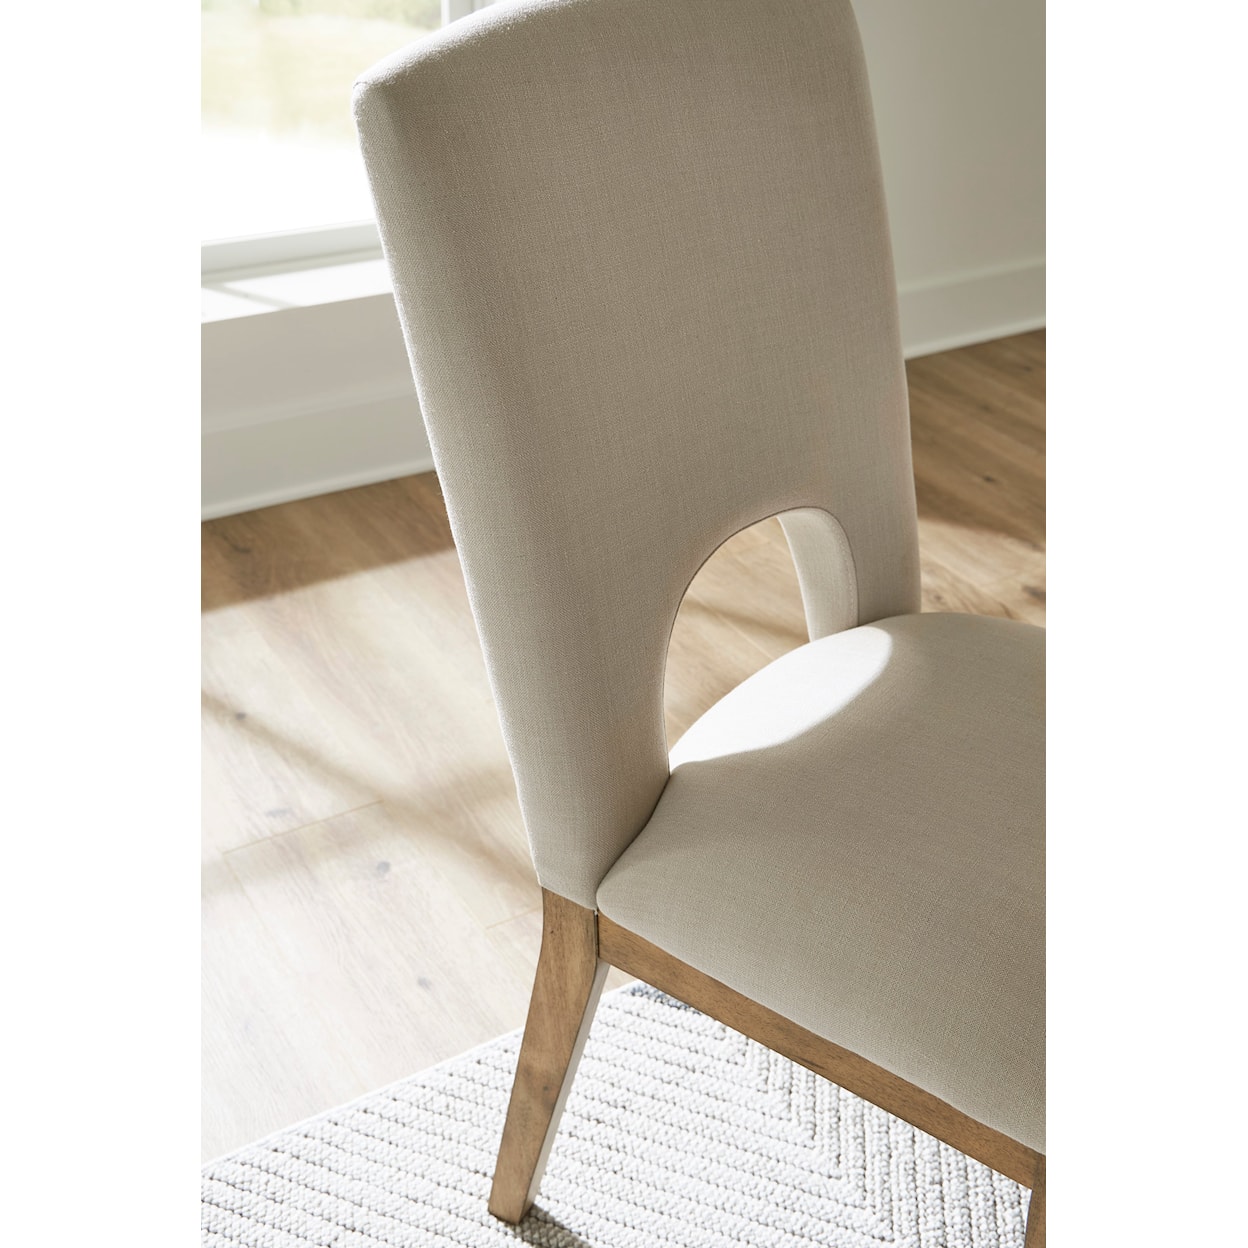 Signature Design by Ashley Dakmore Dining Chair